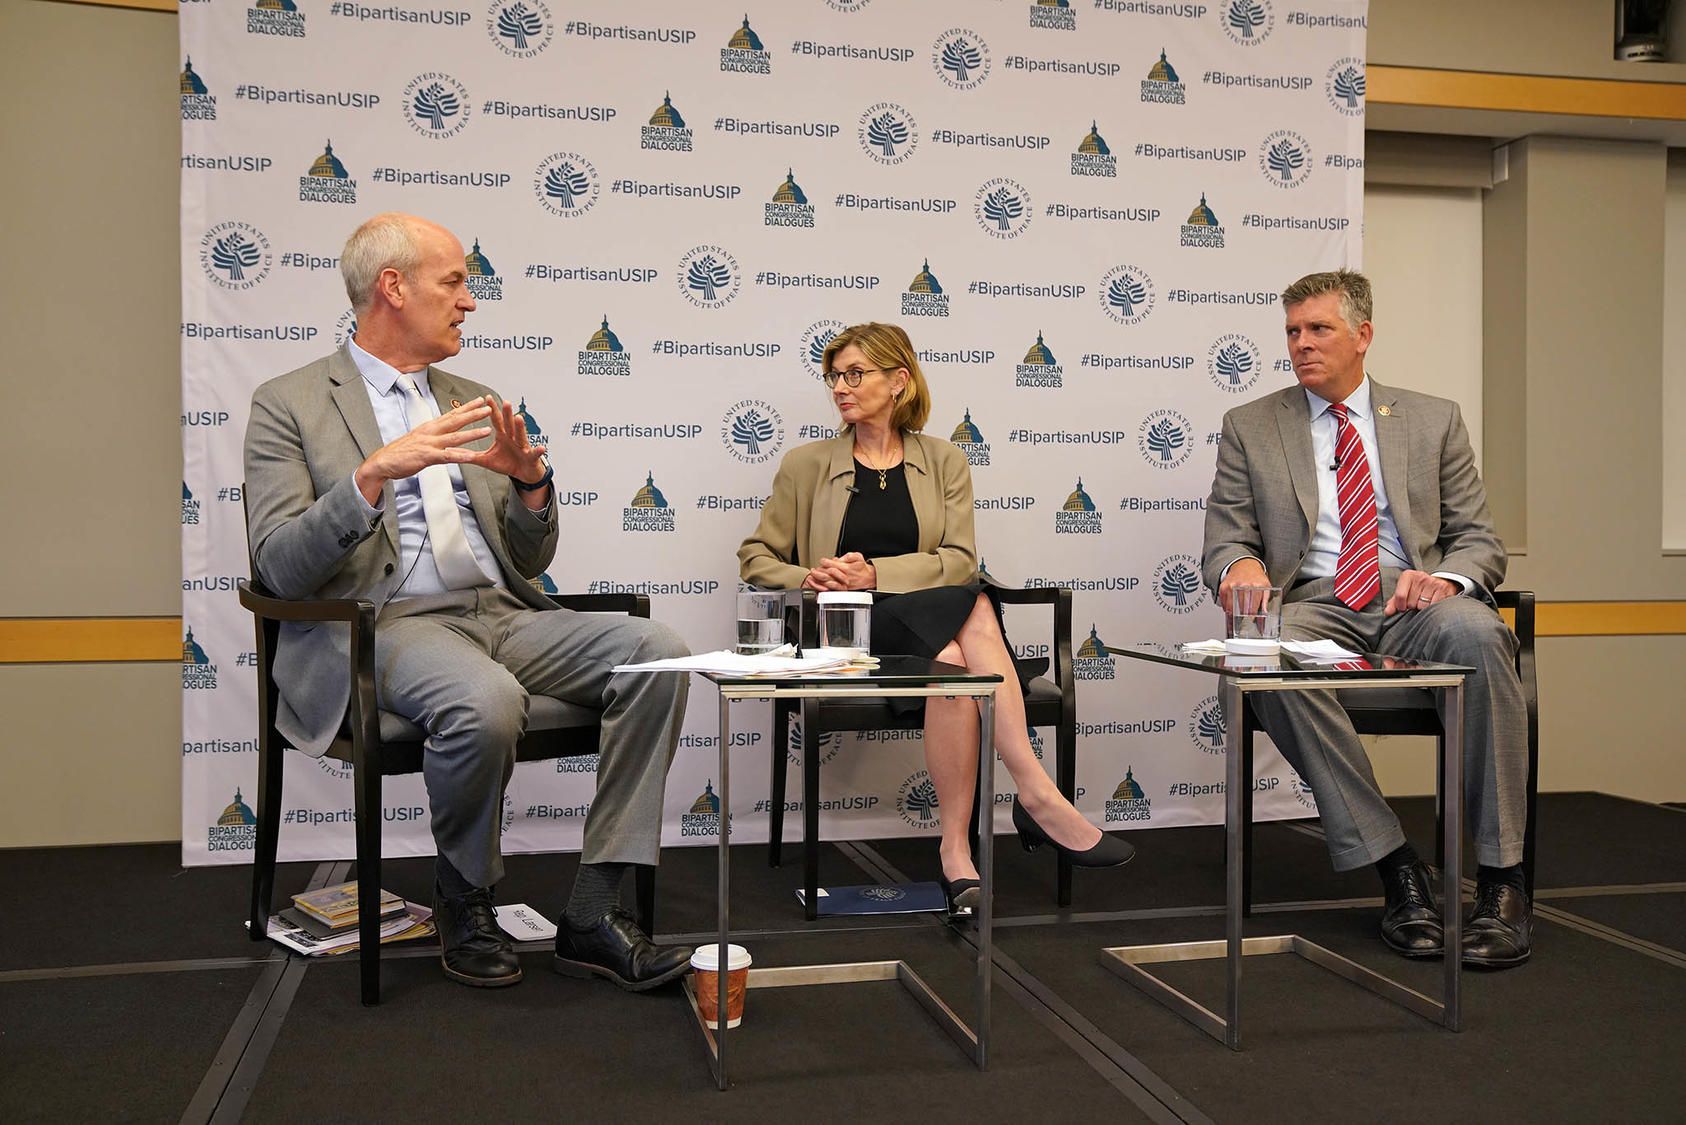 From left to right: Rep. Rick Larsen (D-WA), USIP’s Nancy Lindborg and Rep. Darin LaHood (R-IL).